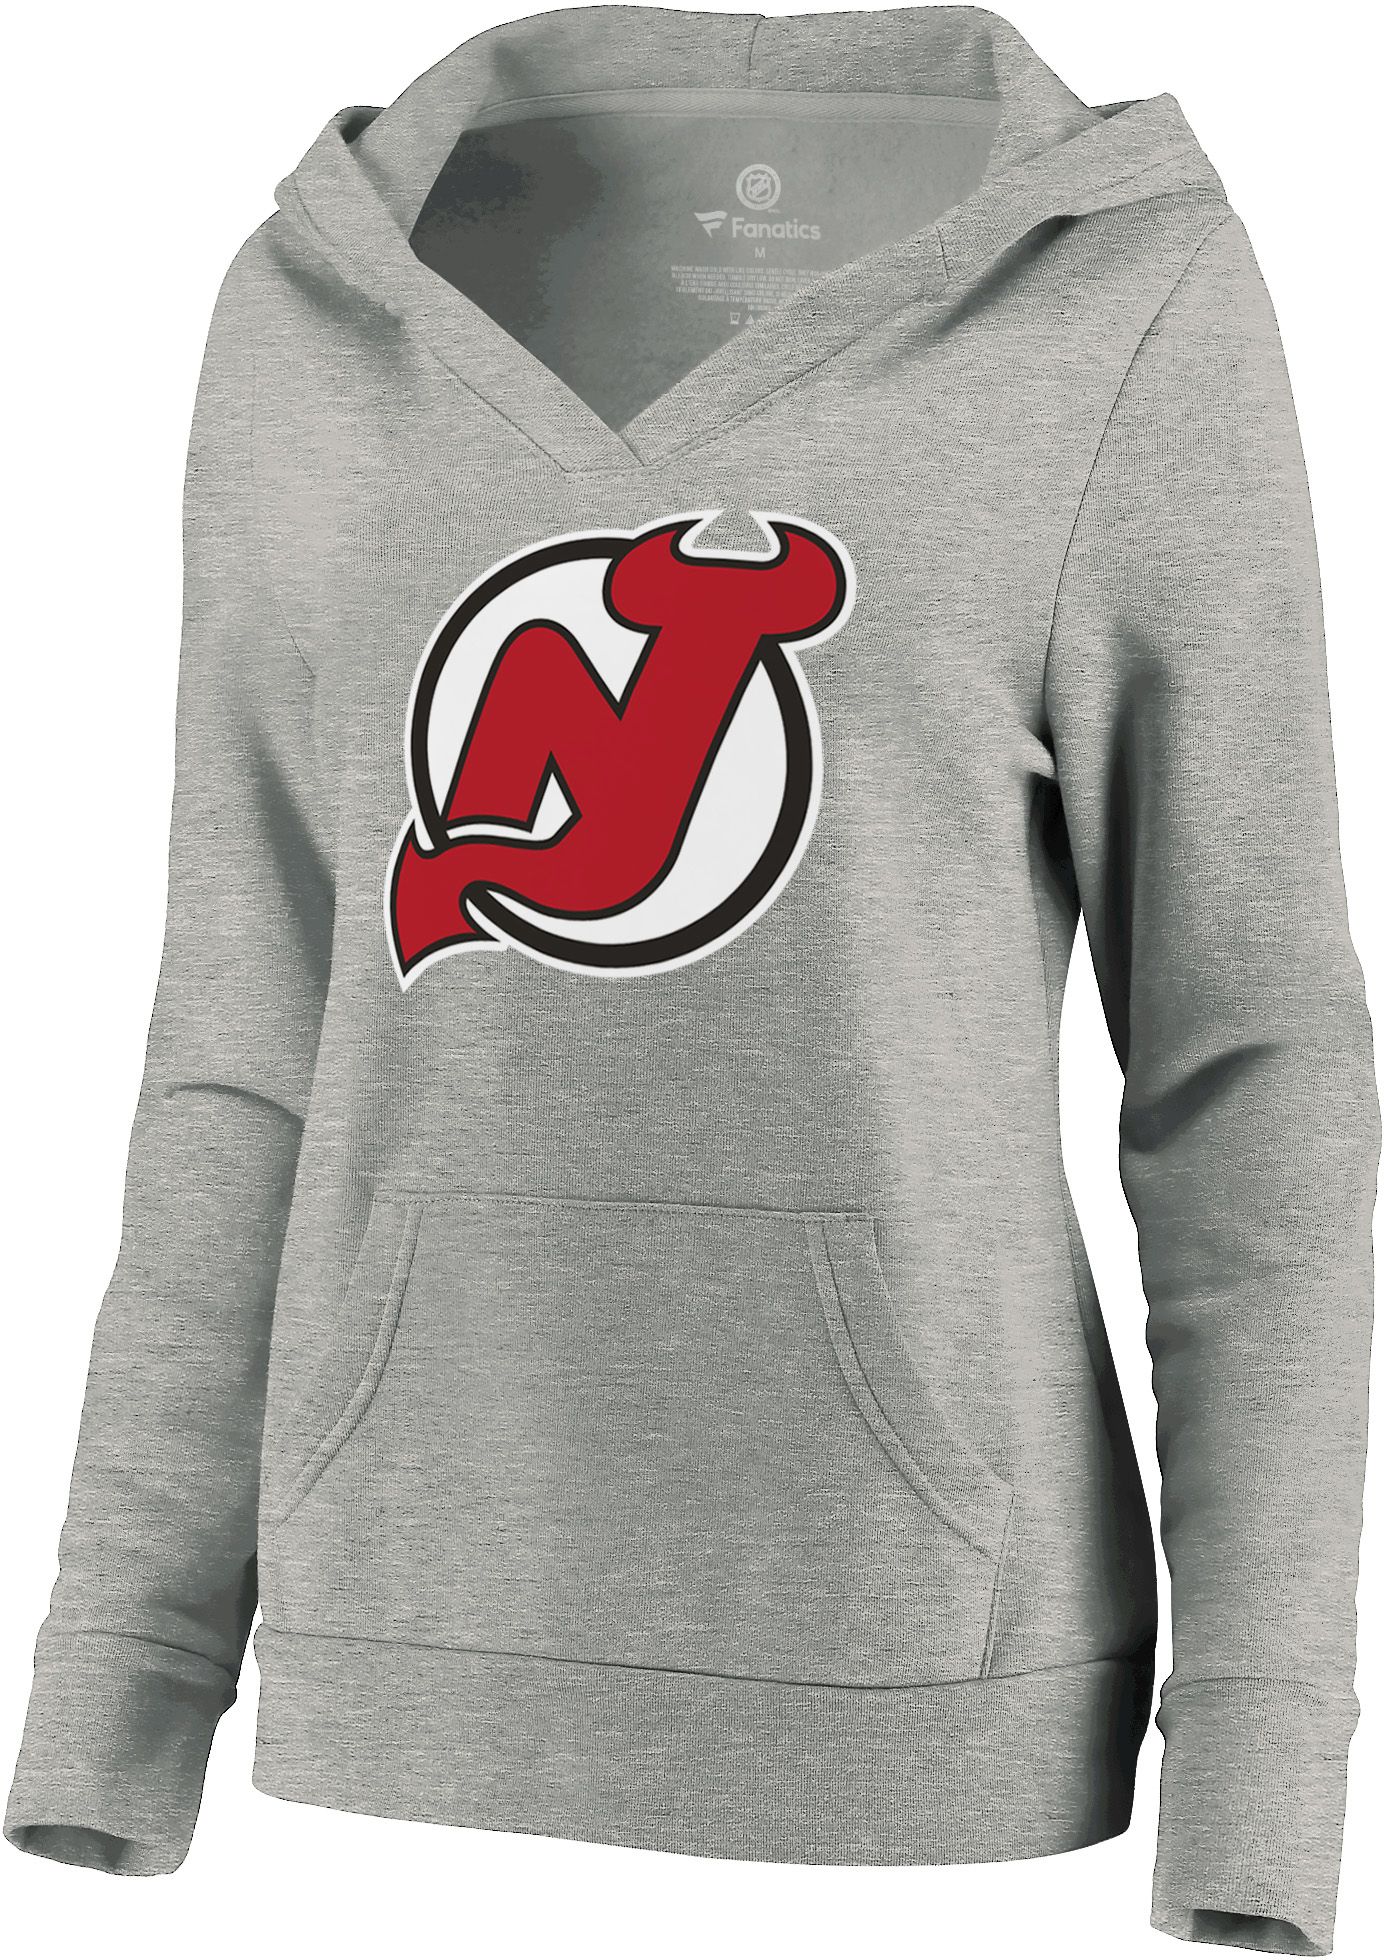 New Jersey Devils Apparel & Gear  Curbside Pickup Available at DICK'S